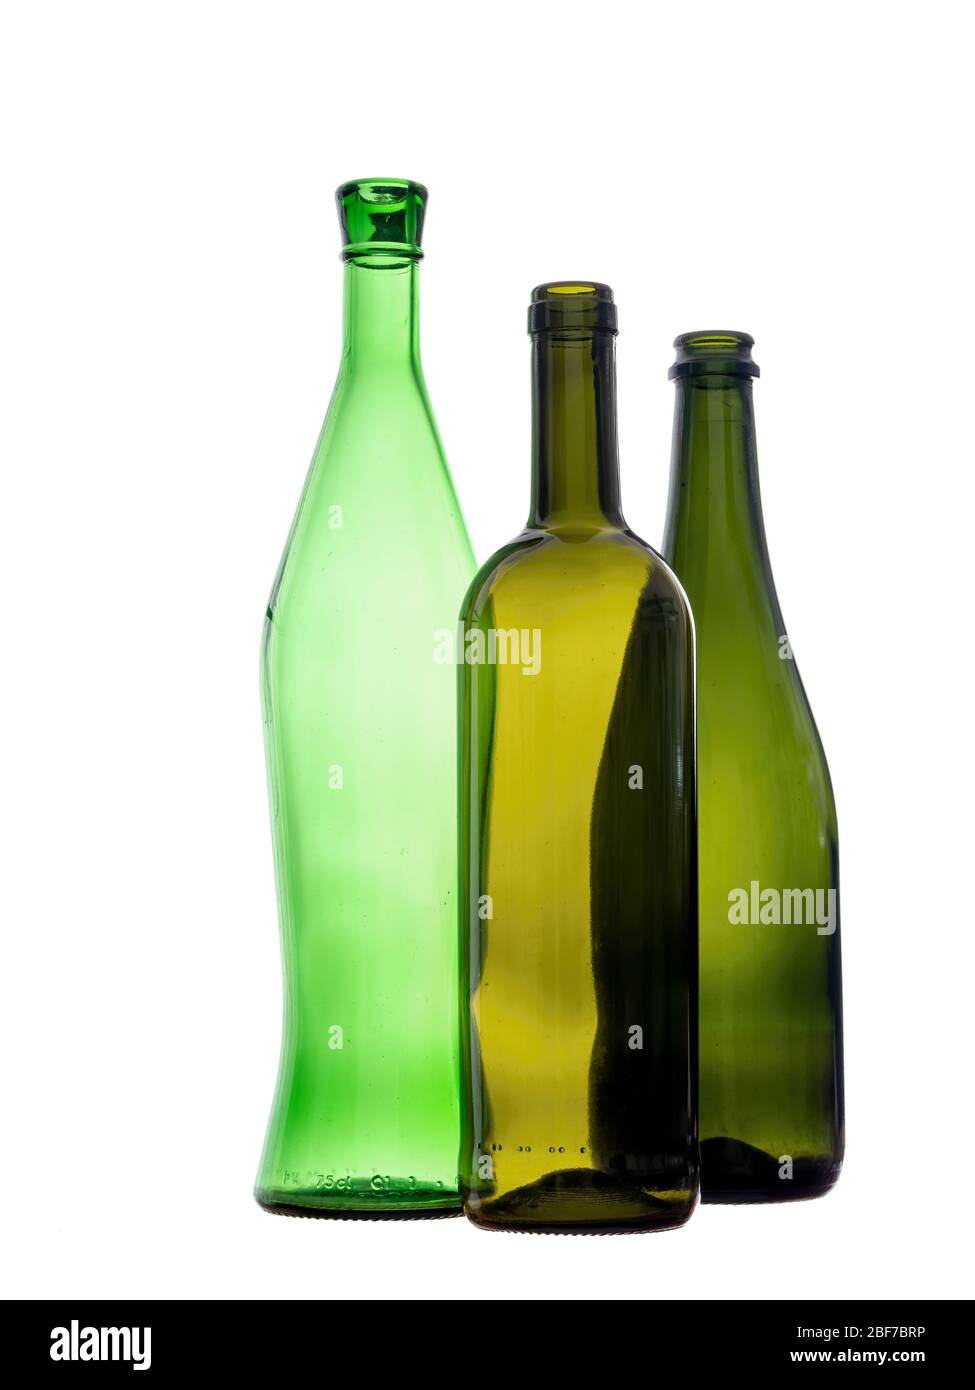 Various green glass wine bottles, empty. Isolated on white background. Three objects still life. Stock Photo